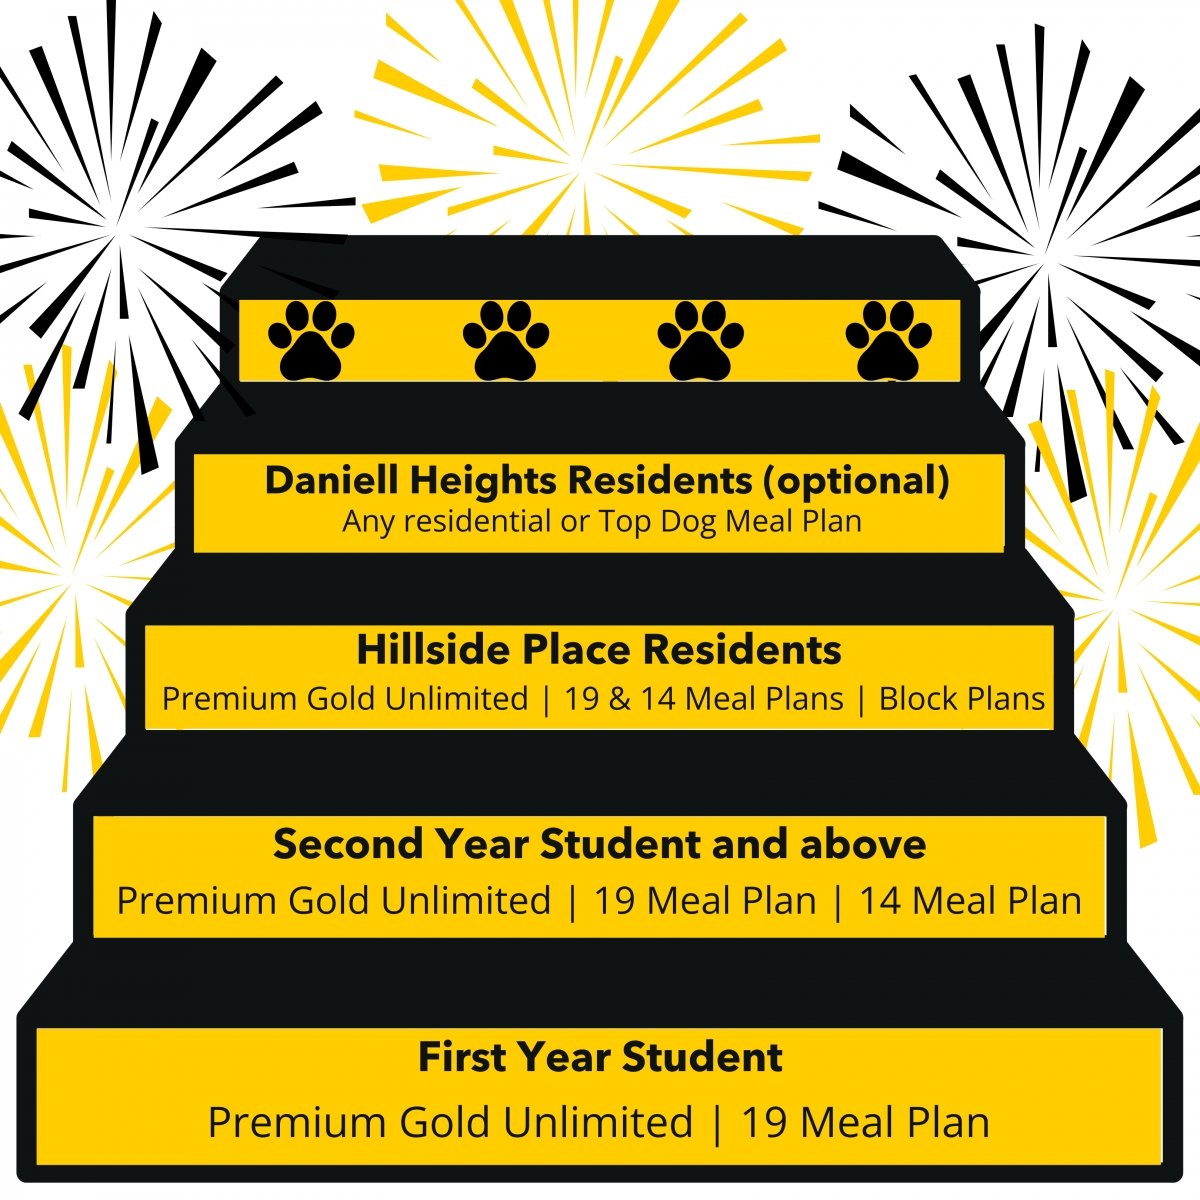 Stairway to success: First year students: Unlimited Gold or 19 Meal Plan. Second year and above: Unlimited Gold, 19 or 14 Meal Plan. Hillside residents: Block plans, Unlimited Gold, 19 or 14 Meal Plan. Daniell Heights: optional meal plans of Unlimited Gold, 14 or 19 Meal Plan